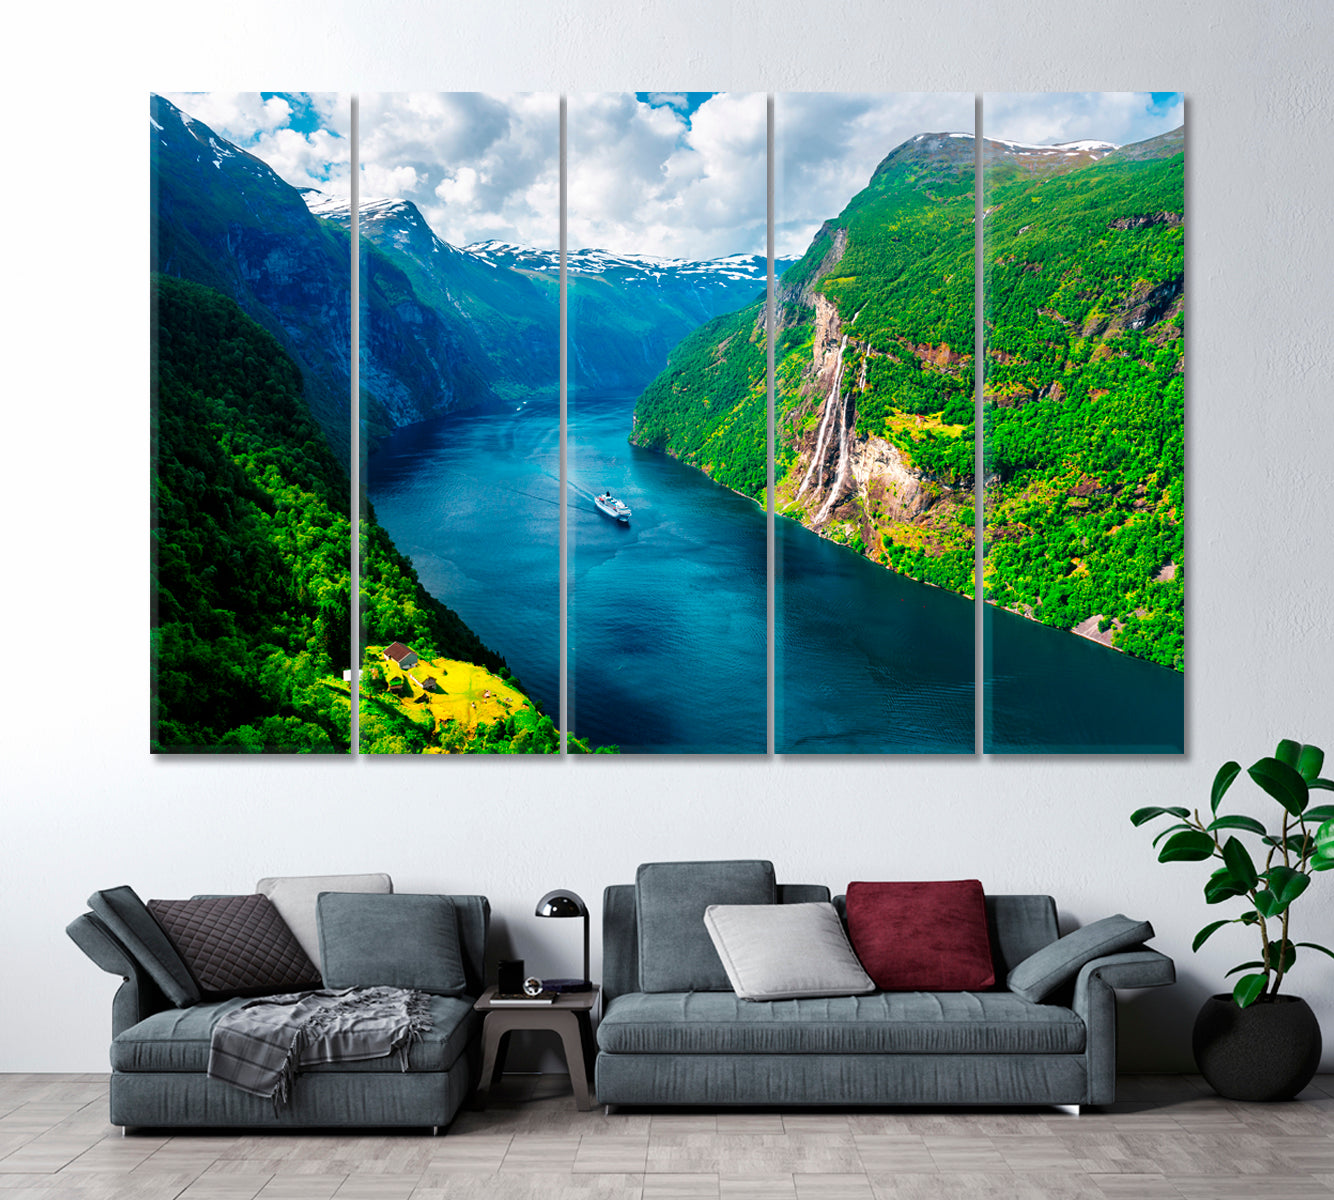 Sunnylvsfjorden Fjord and Seven Sisters Waterfalls Norway Canvas Print ArtLexy 5 Panels 36"x24" inches 